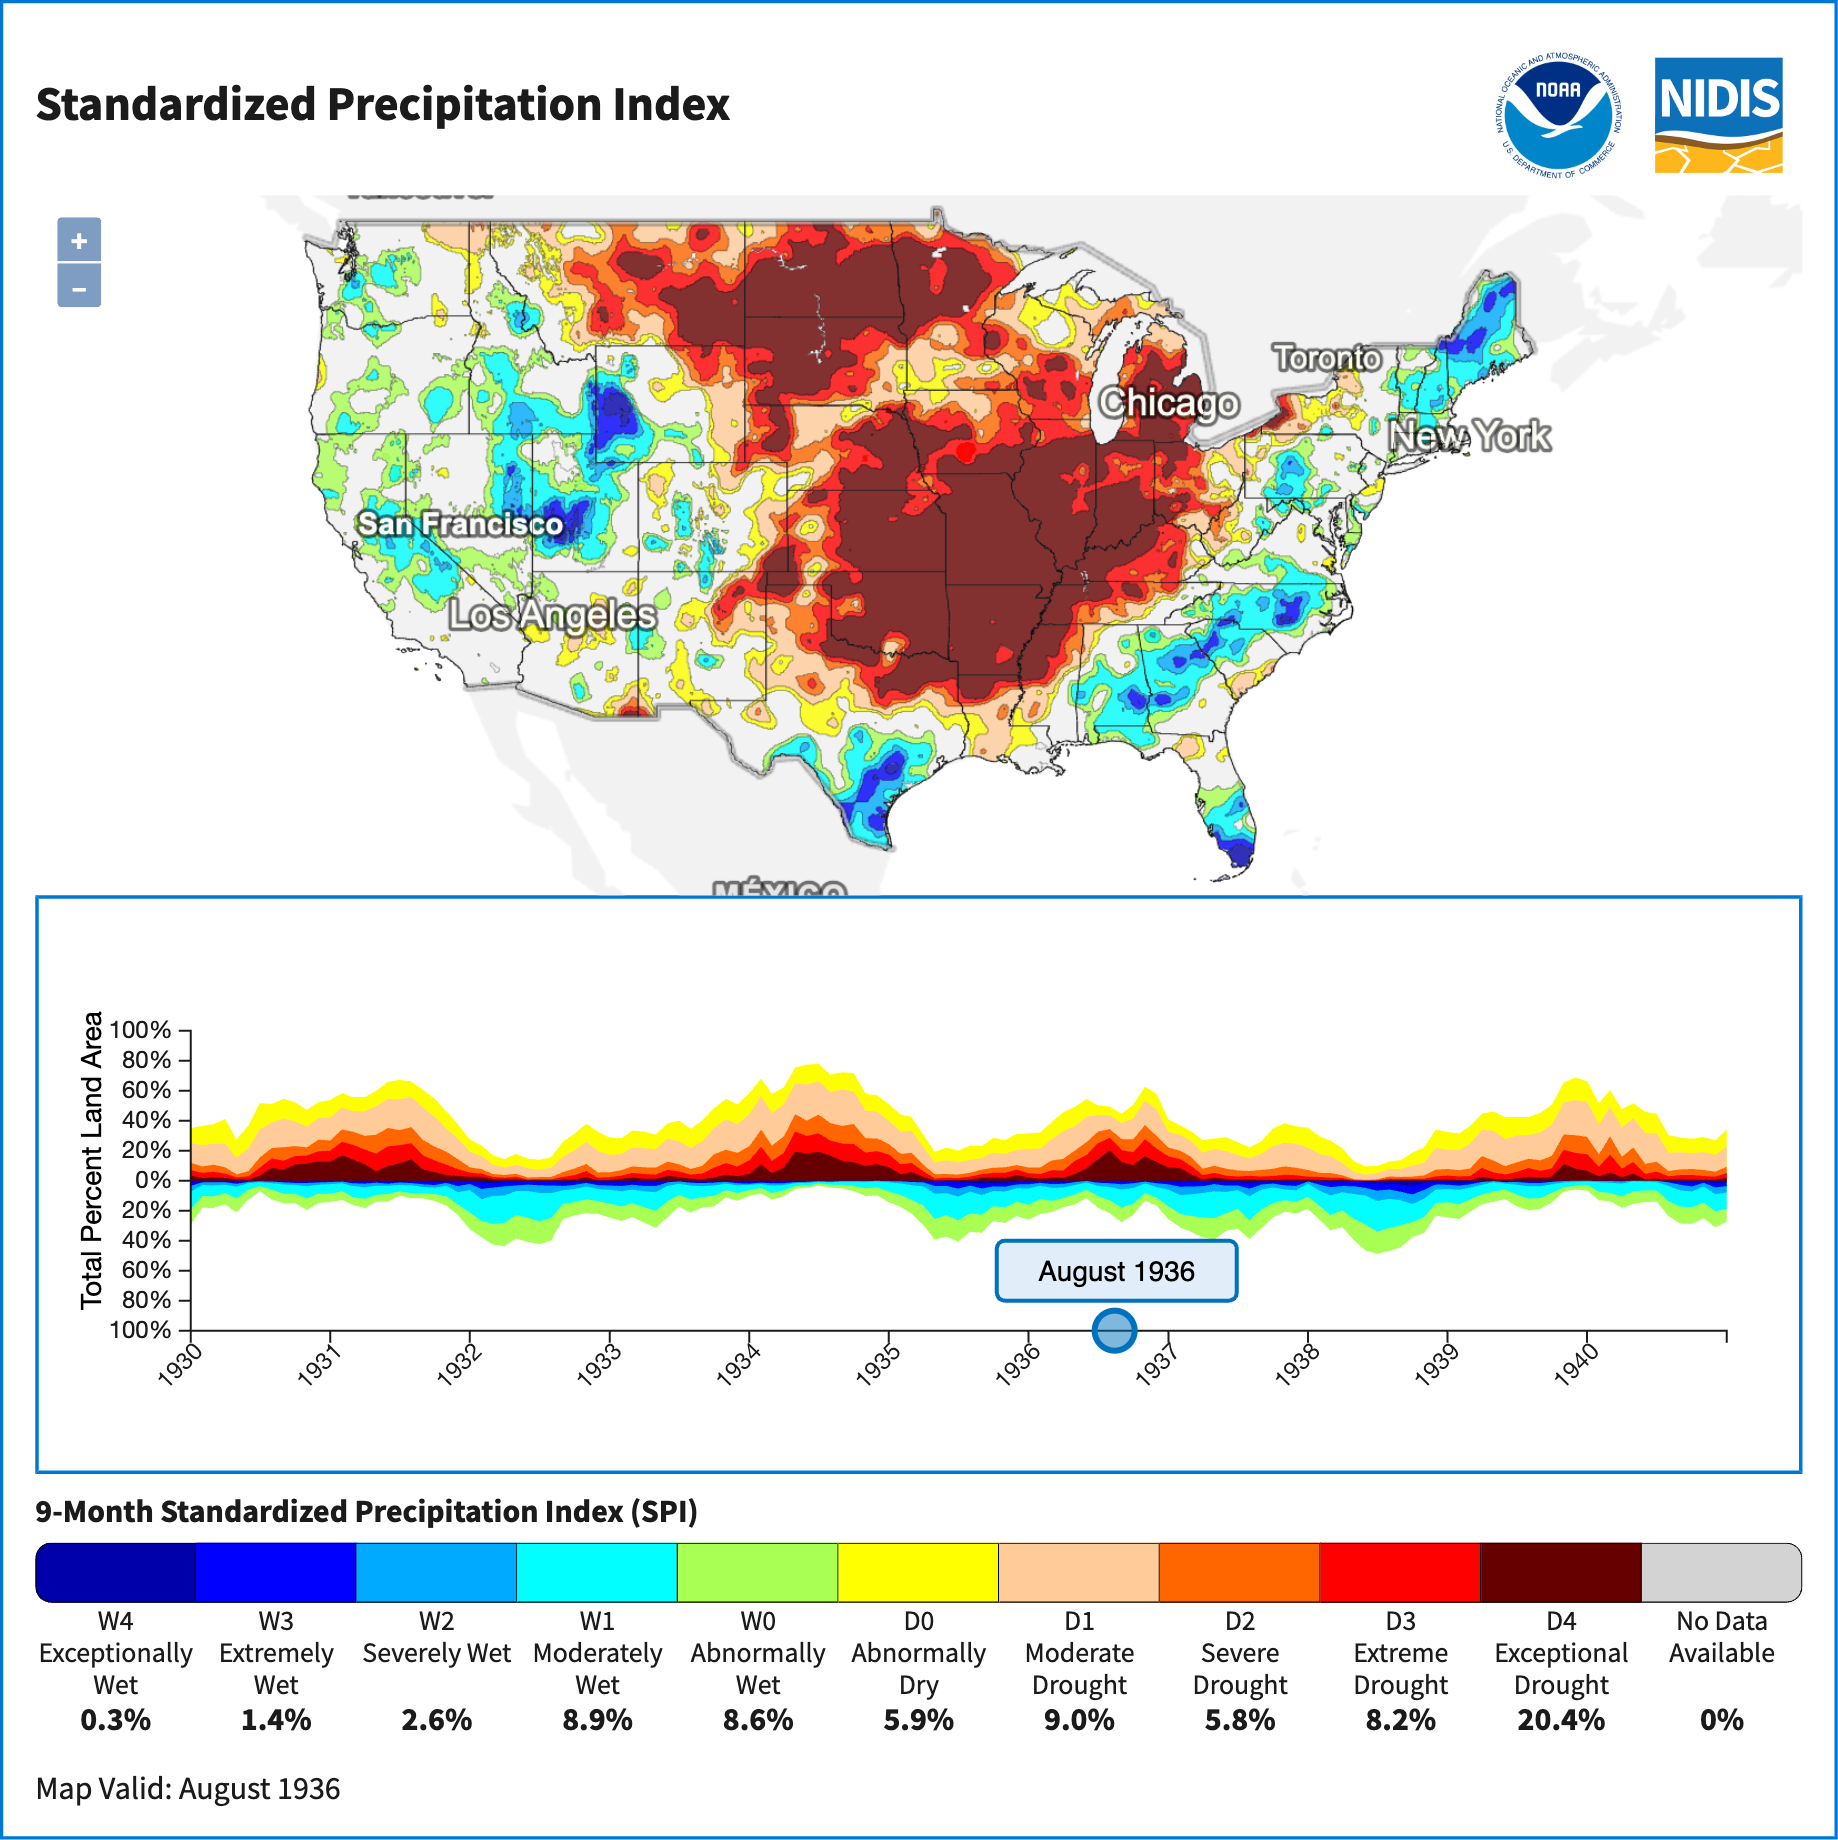 In August 1936, 43.4% of the lower 48 states were in drought, according to a 9-month SPI, with 20.4% in exceptional drought (D4). The "Dust Bowl" drought in the 1930s greatly impacted the Great Plains.